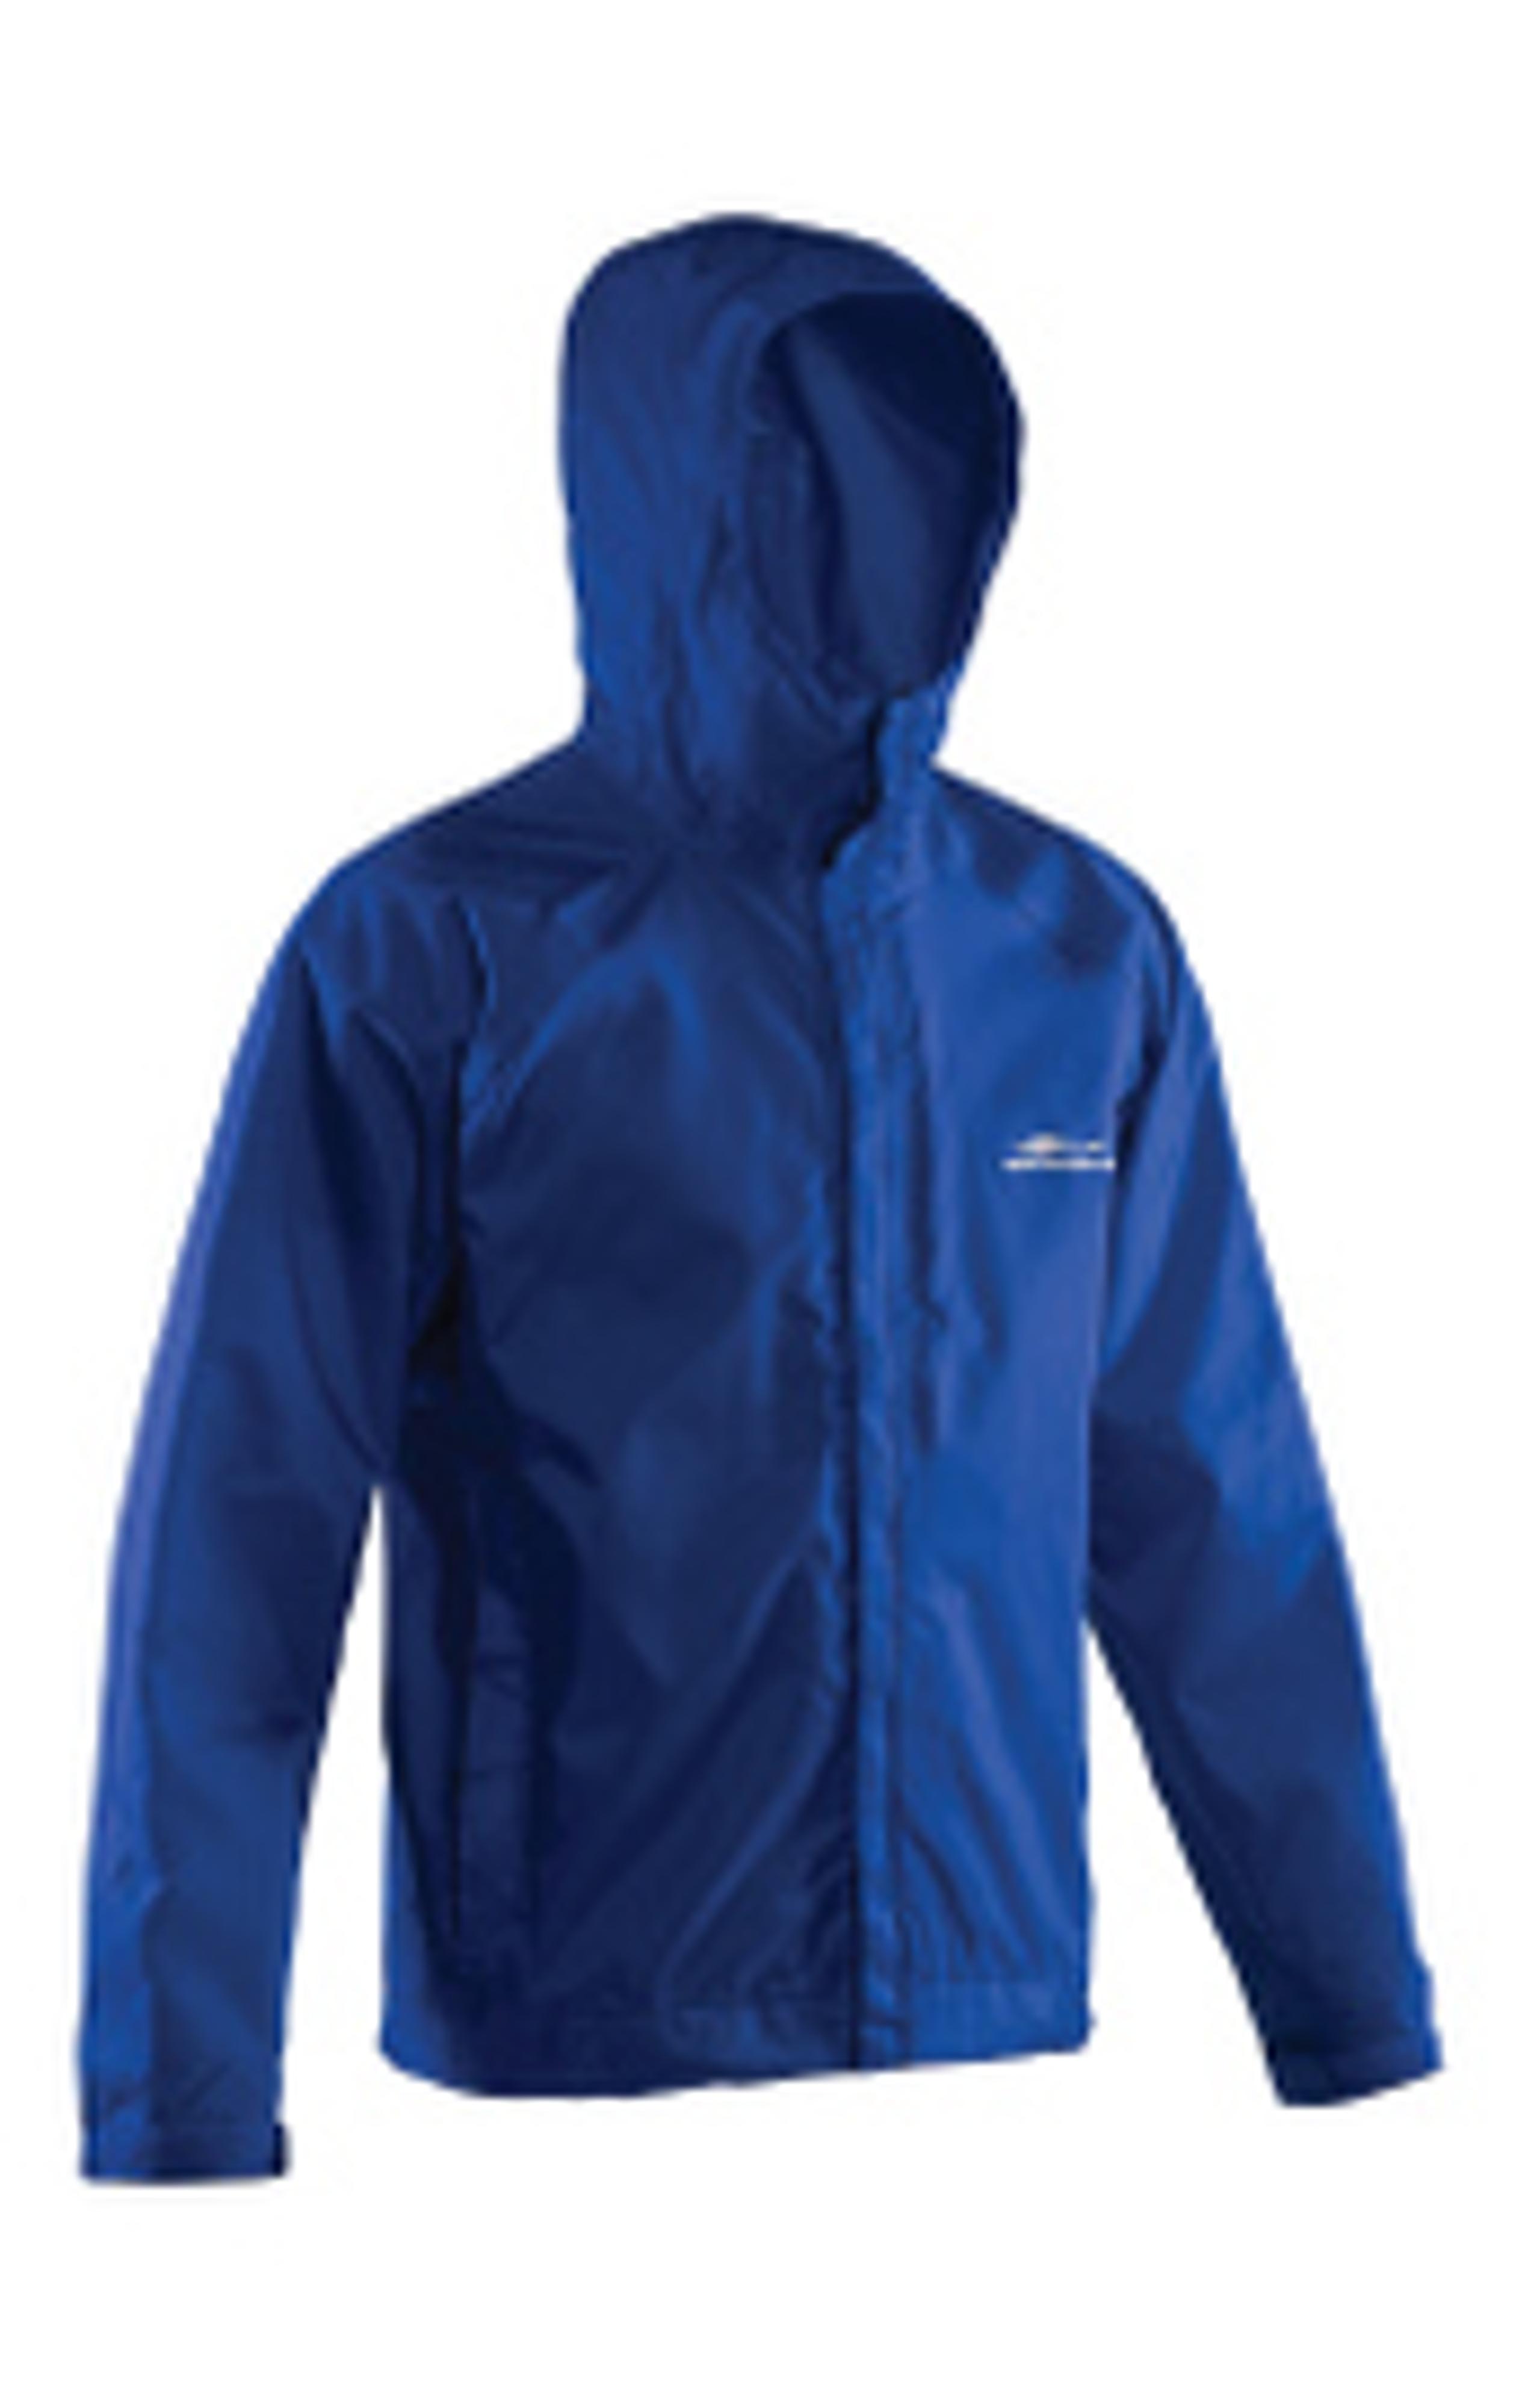 Weather Watch Hooded Sport Fishing Jacket: Fishermans Ideal Supply House